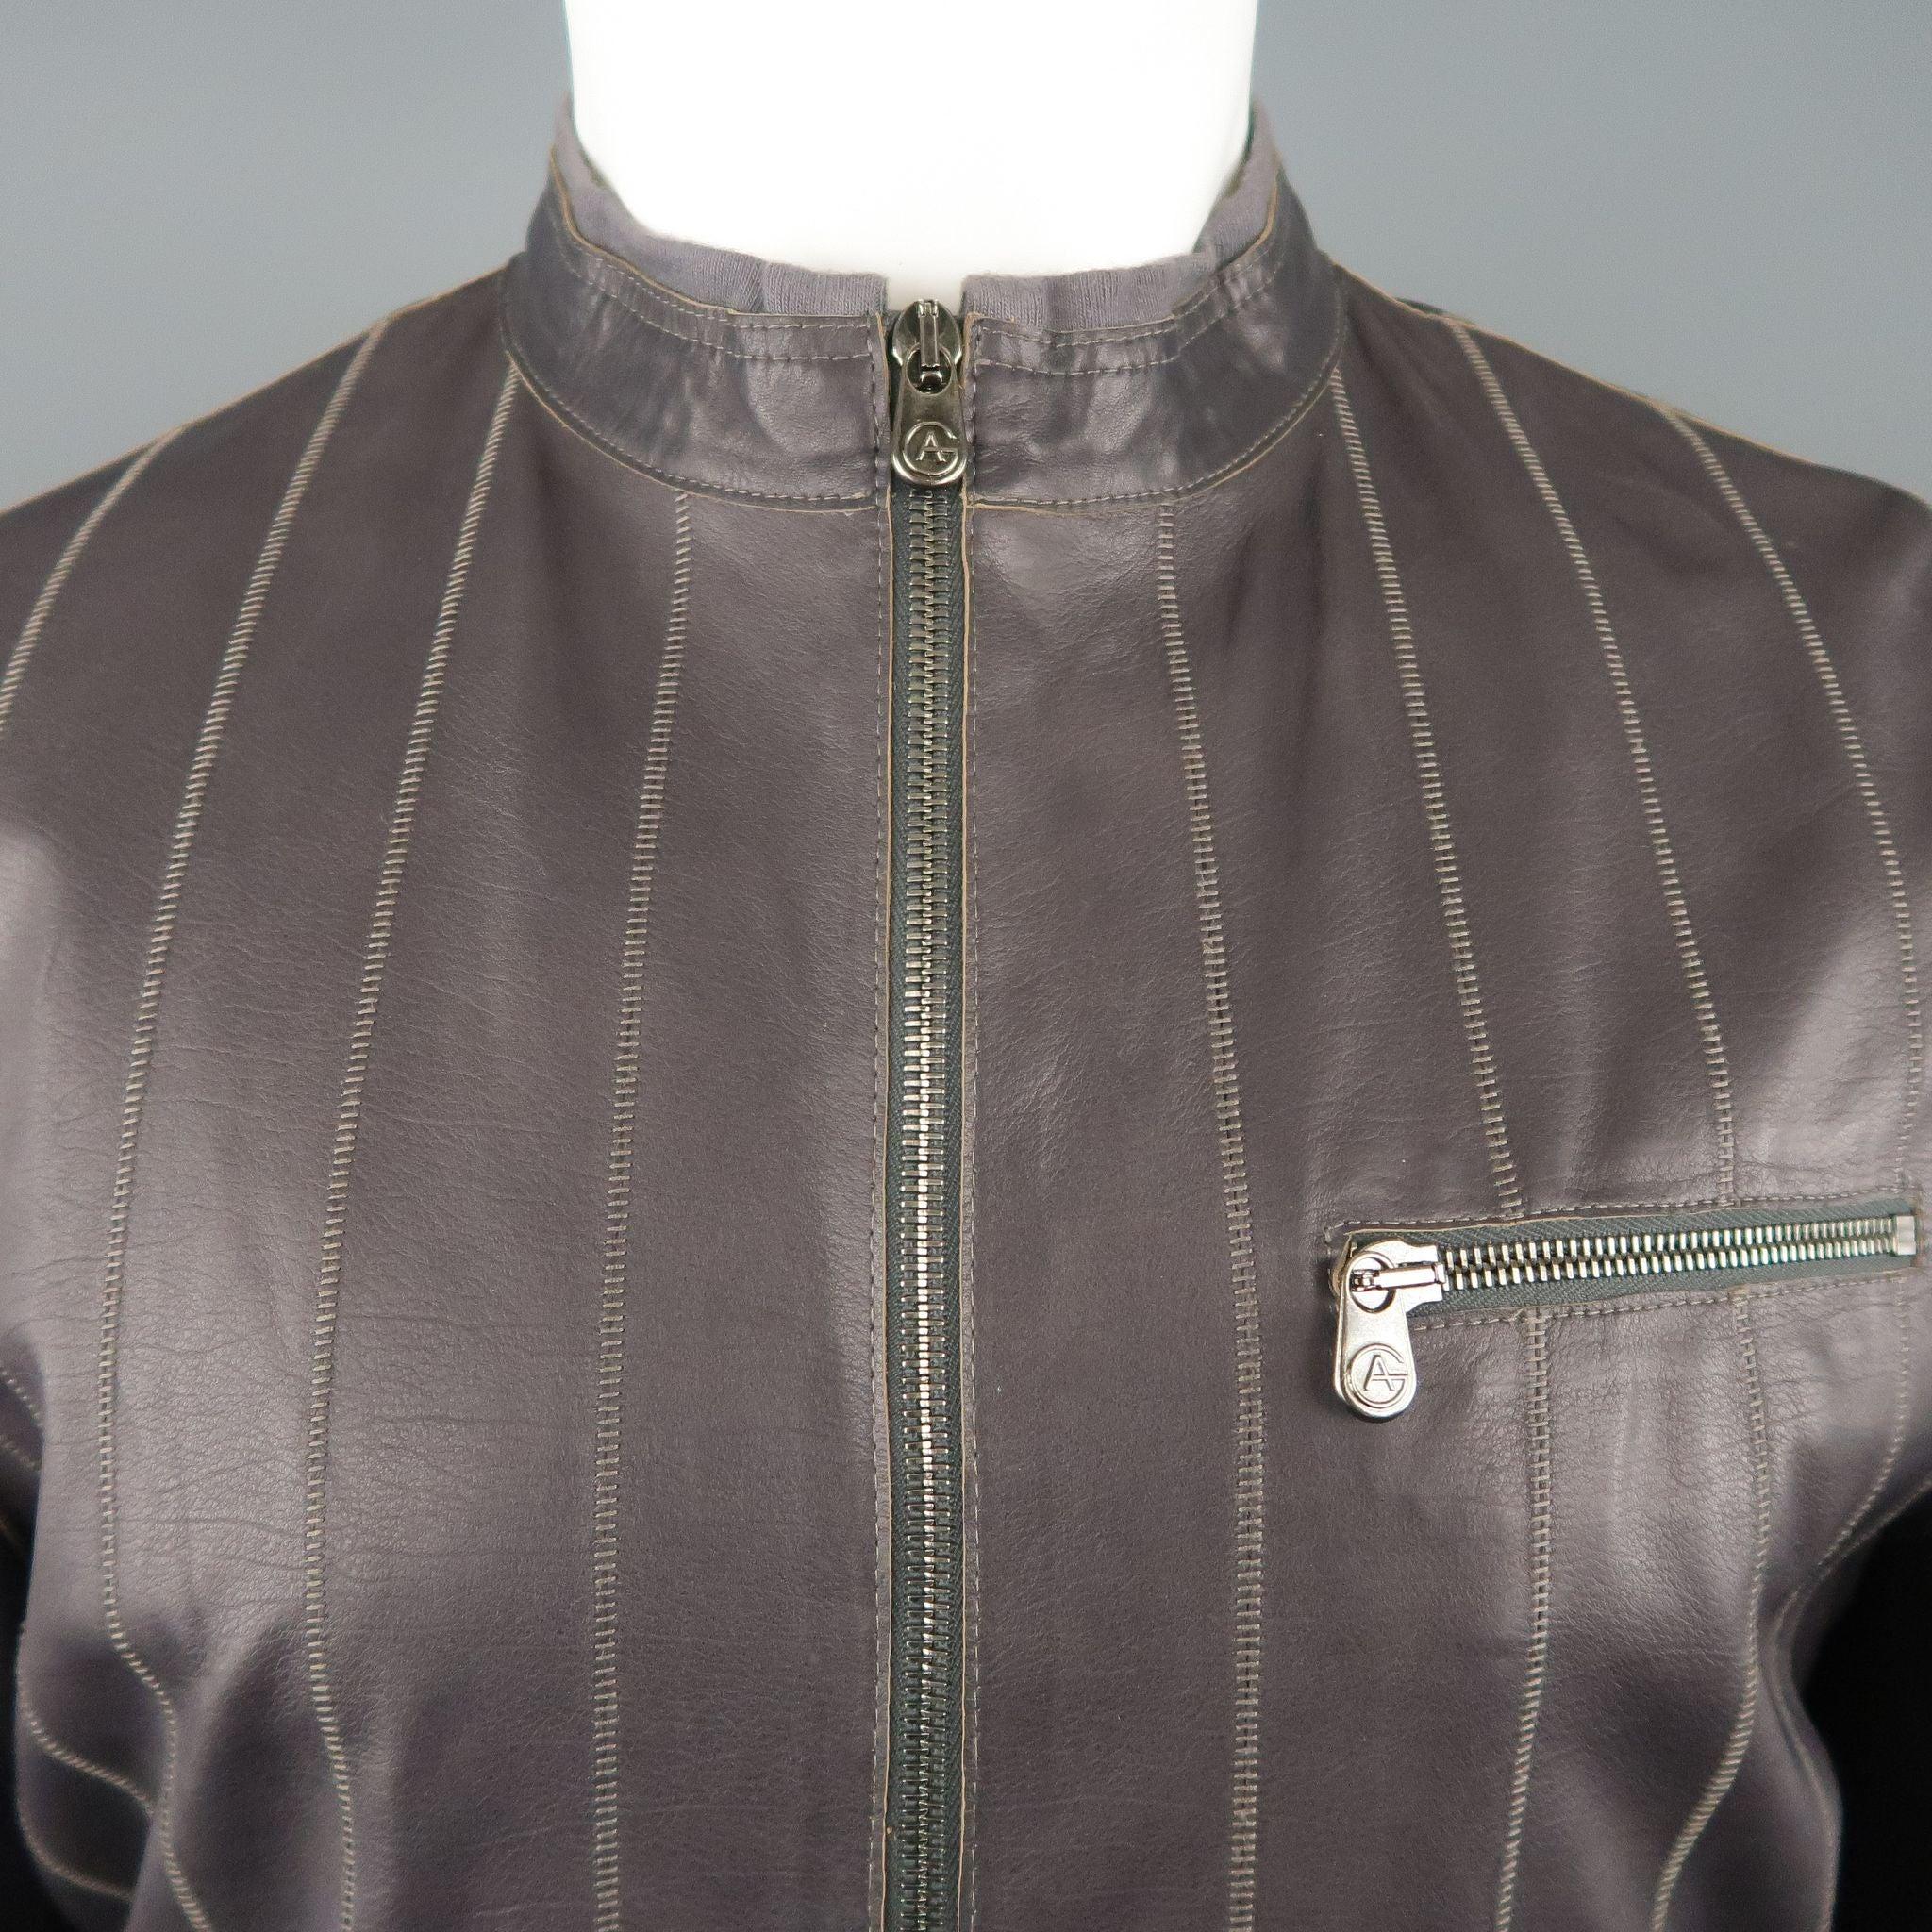 ARMANI COLLEZIONI motorcycle style jacket comes in muted eggplant purple leather with stitched stripe pattern, band collar with knit trim, zip cuffs, and zip pockets. Excellent Pre-Owned Condition. 

Marked:   40 

Measurements: 
 
Shoulder: 18